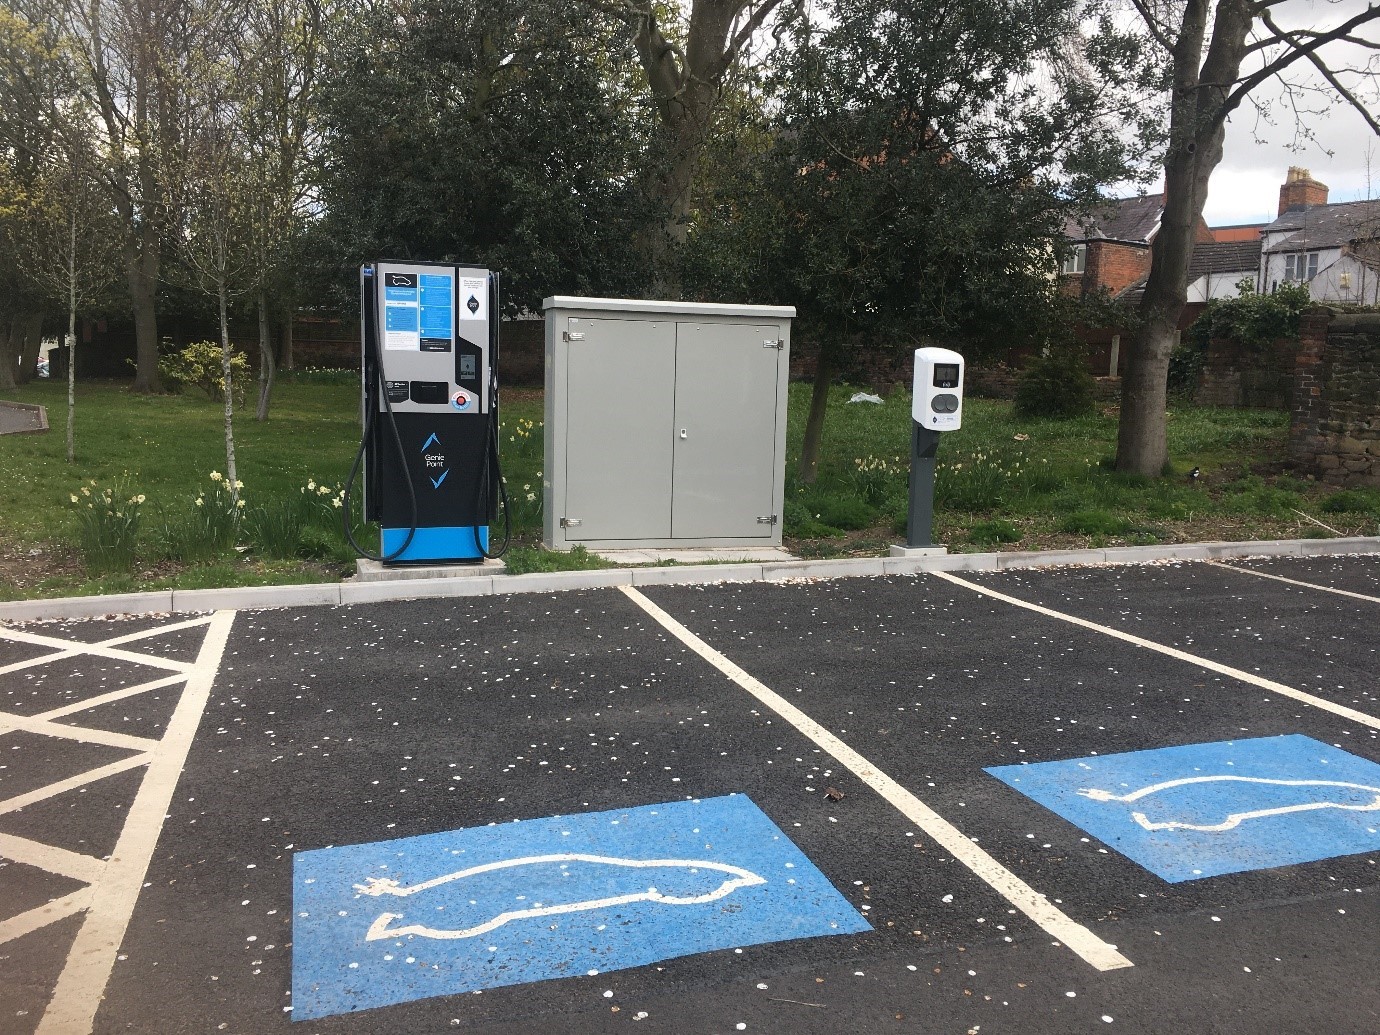 More places to charge your electric car installed in Wrexham.